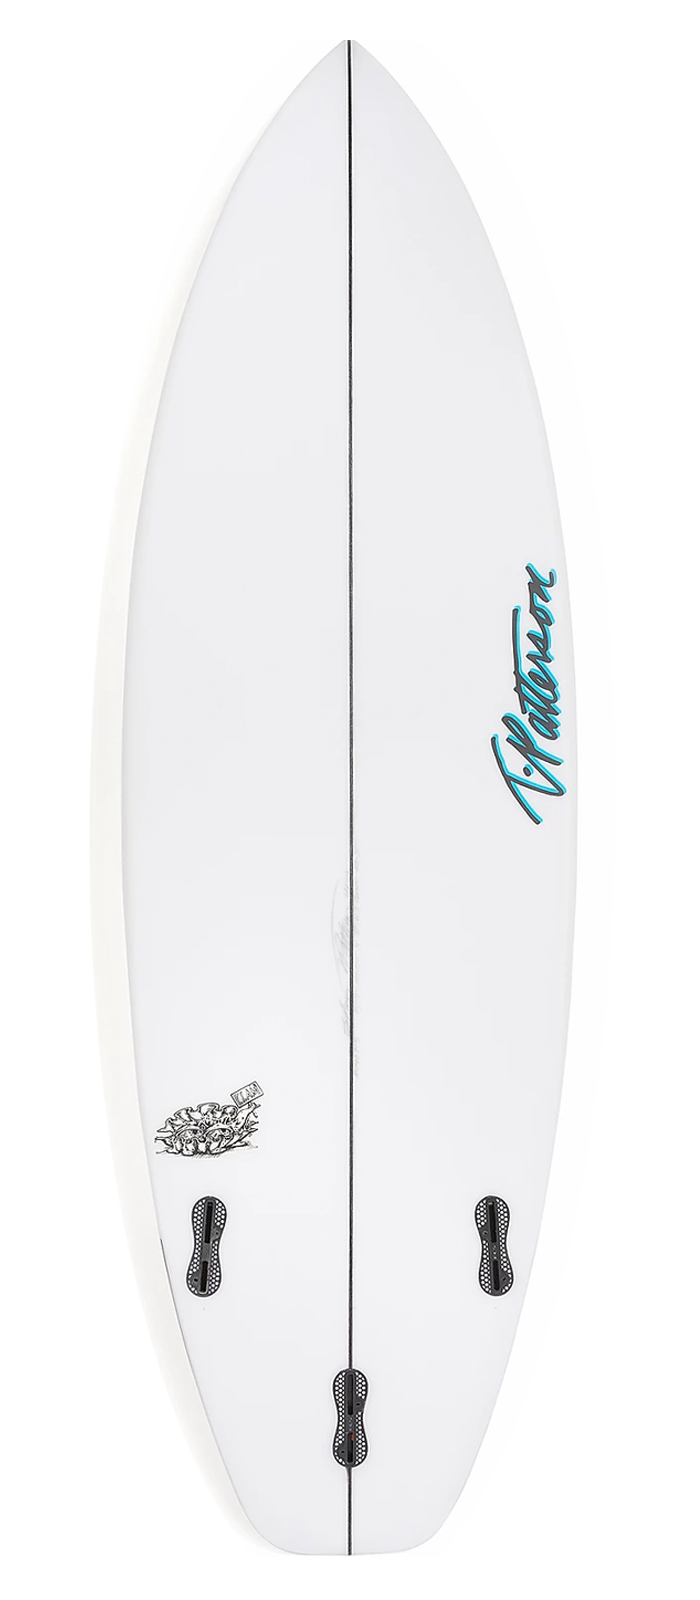 THE CLAM surfboard model bottom